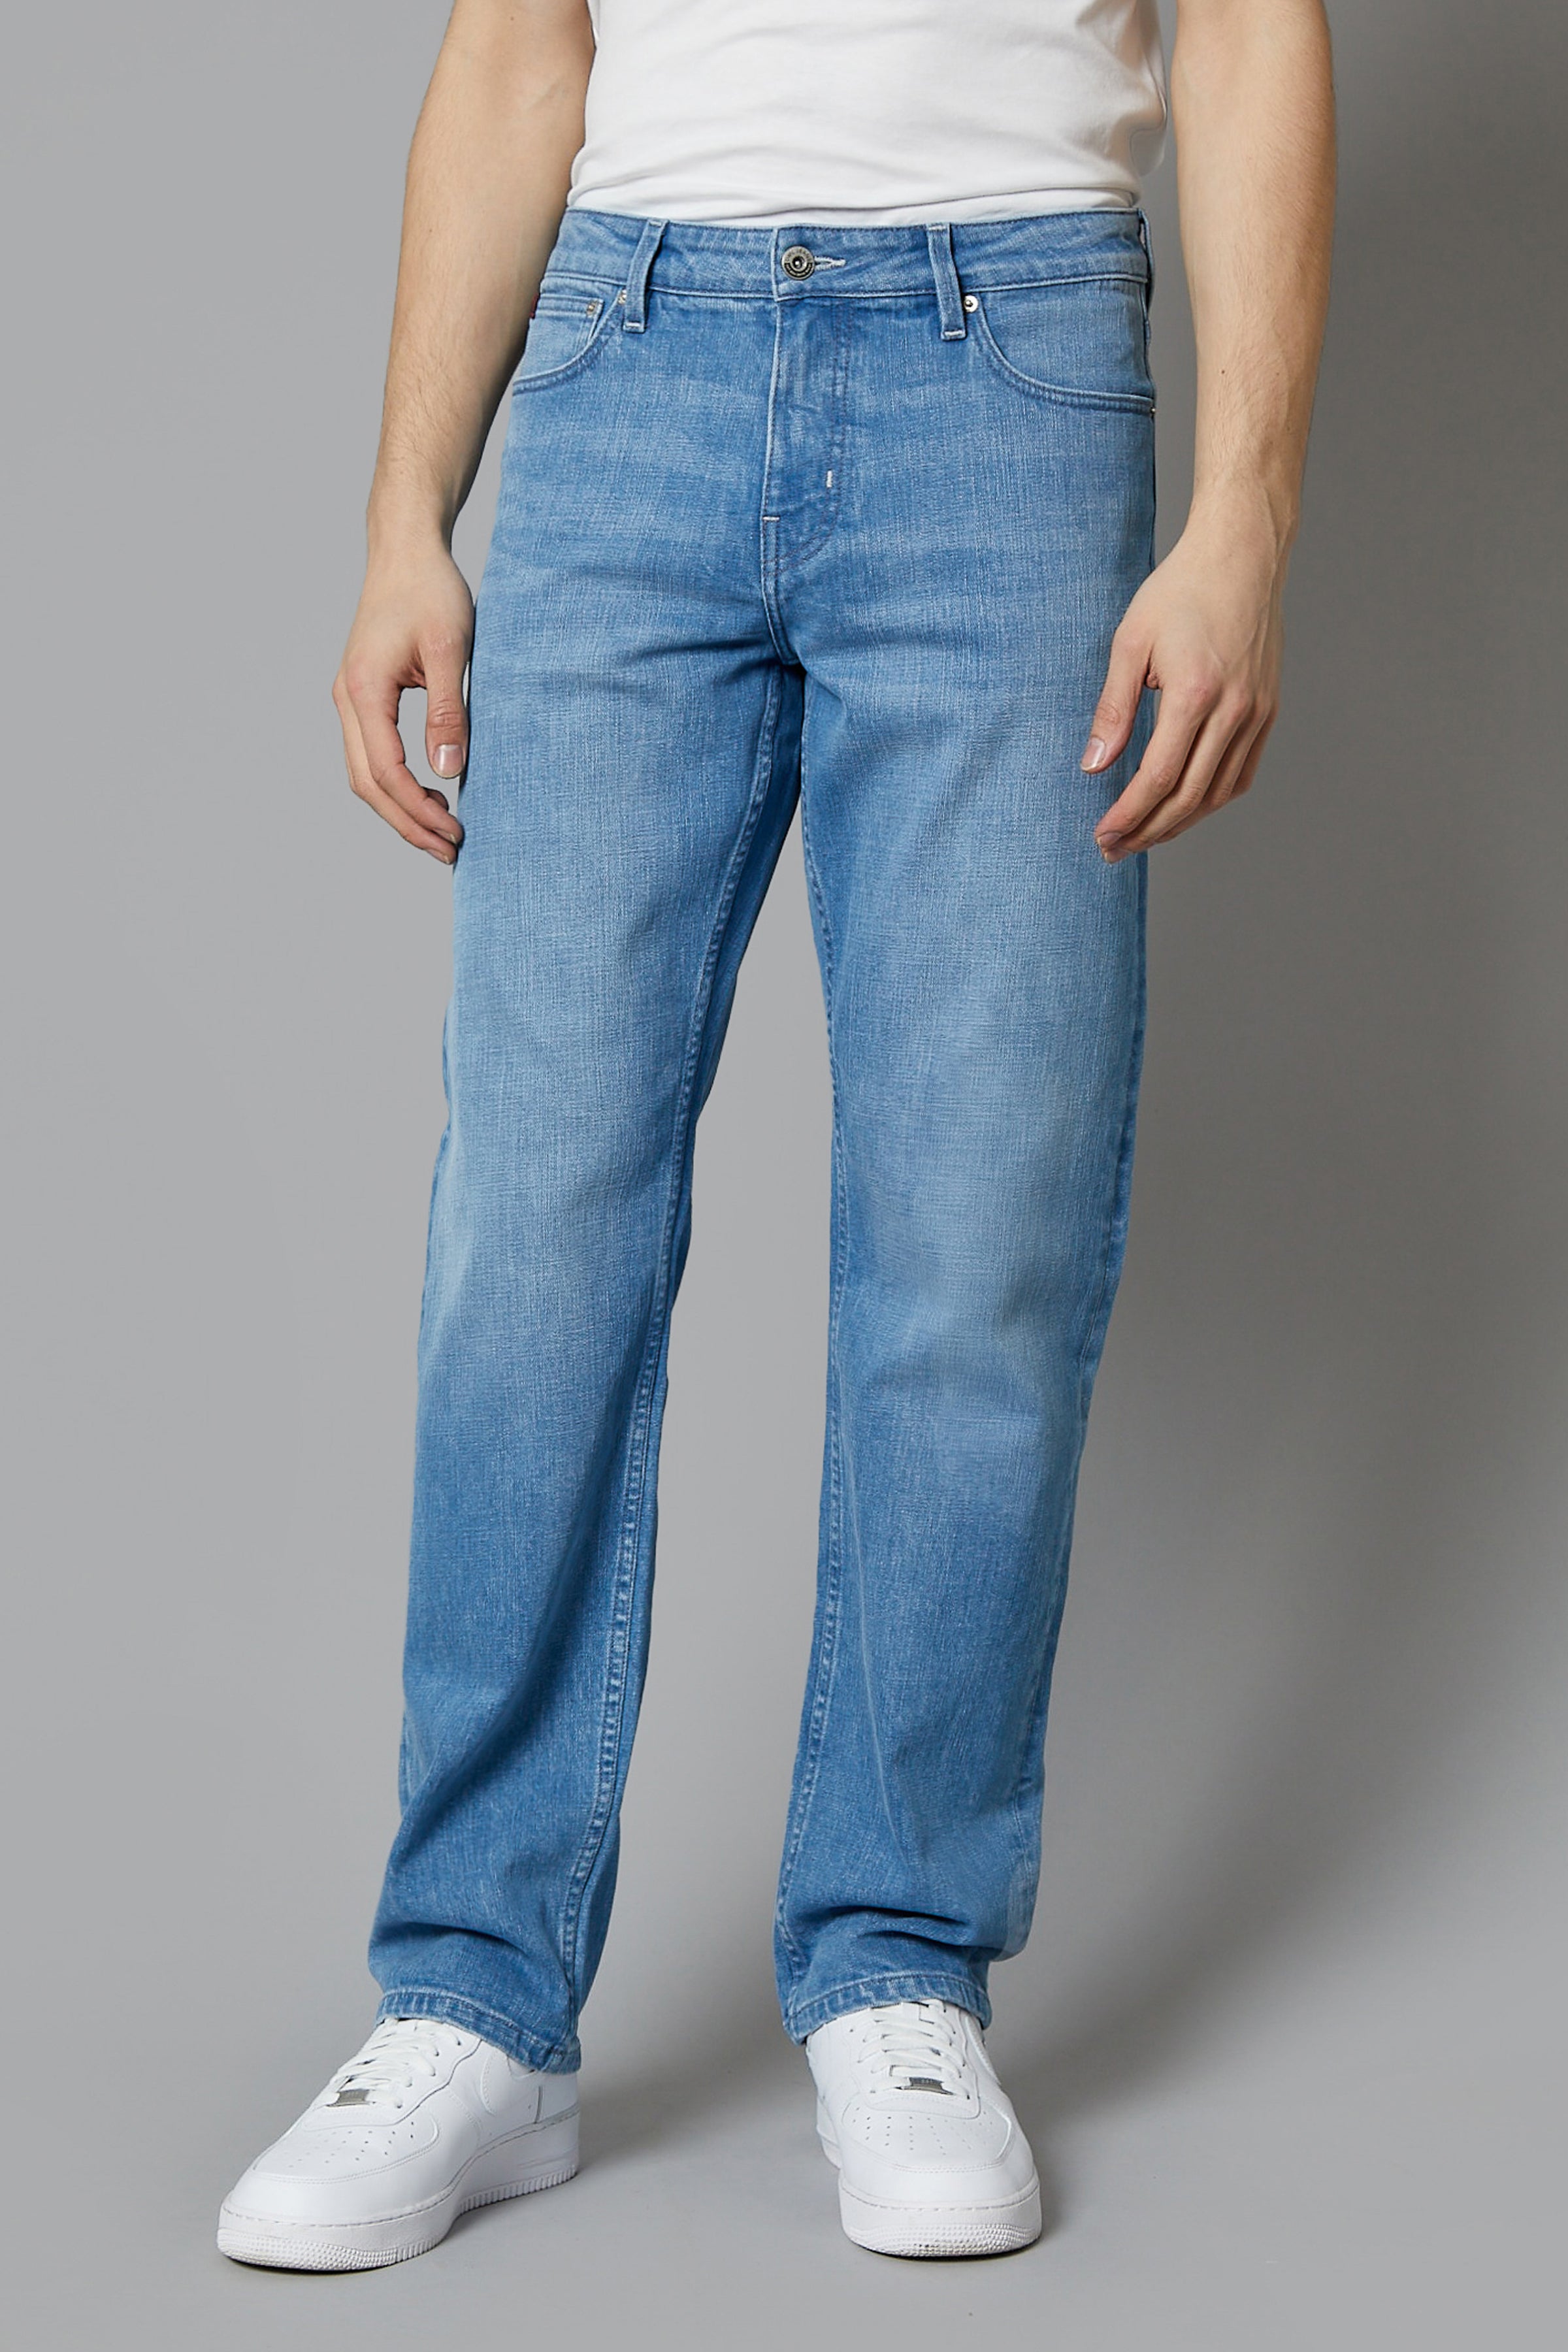 MONTANA Loose Fit Jeans In Light Blue | DML Jeans